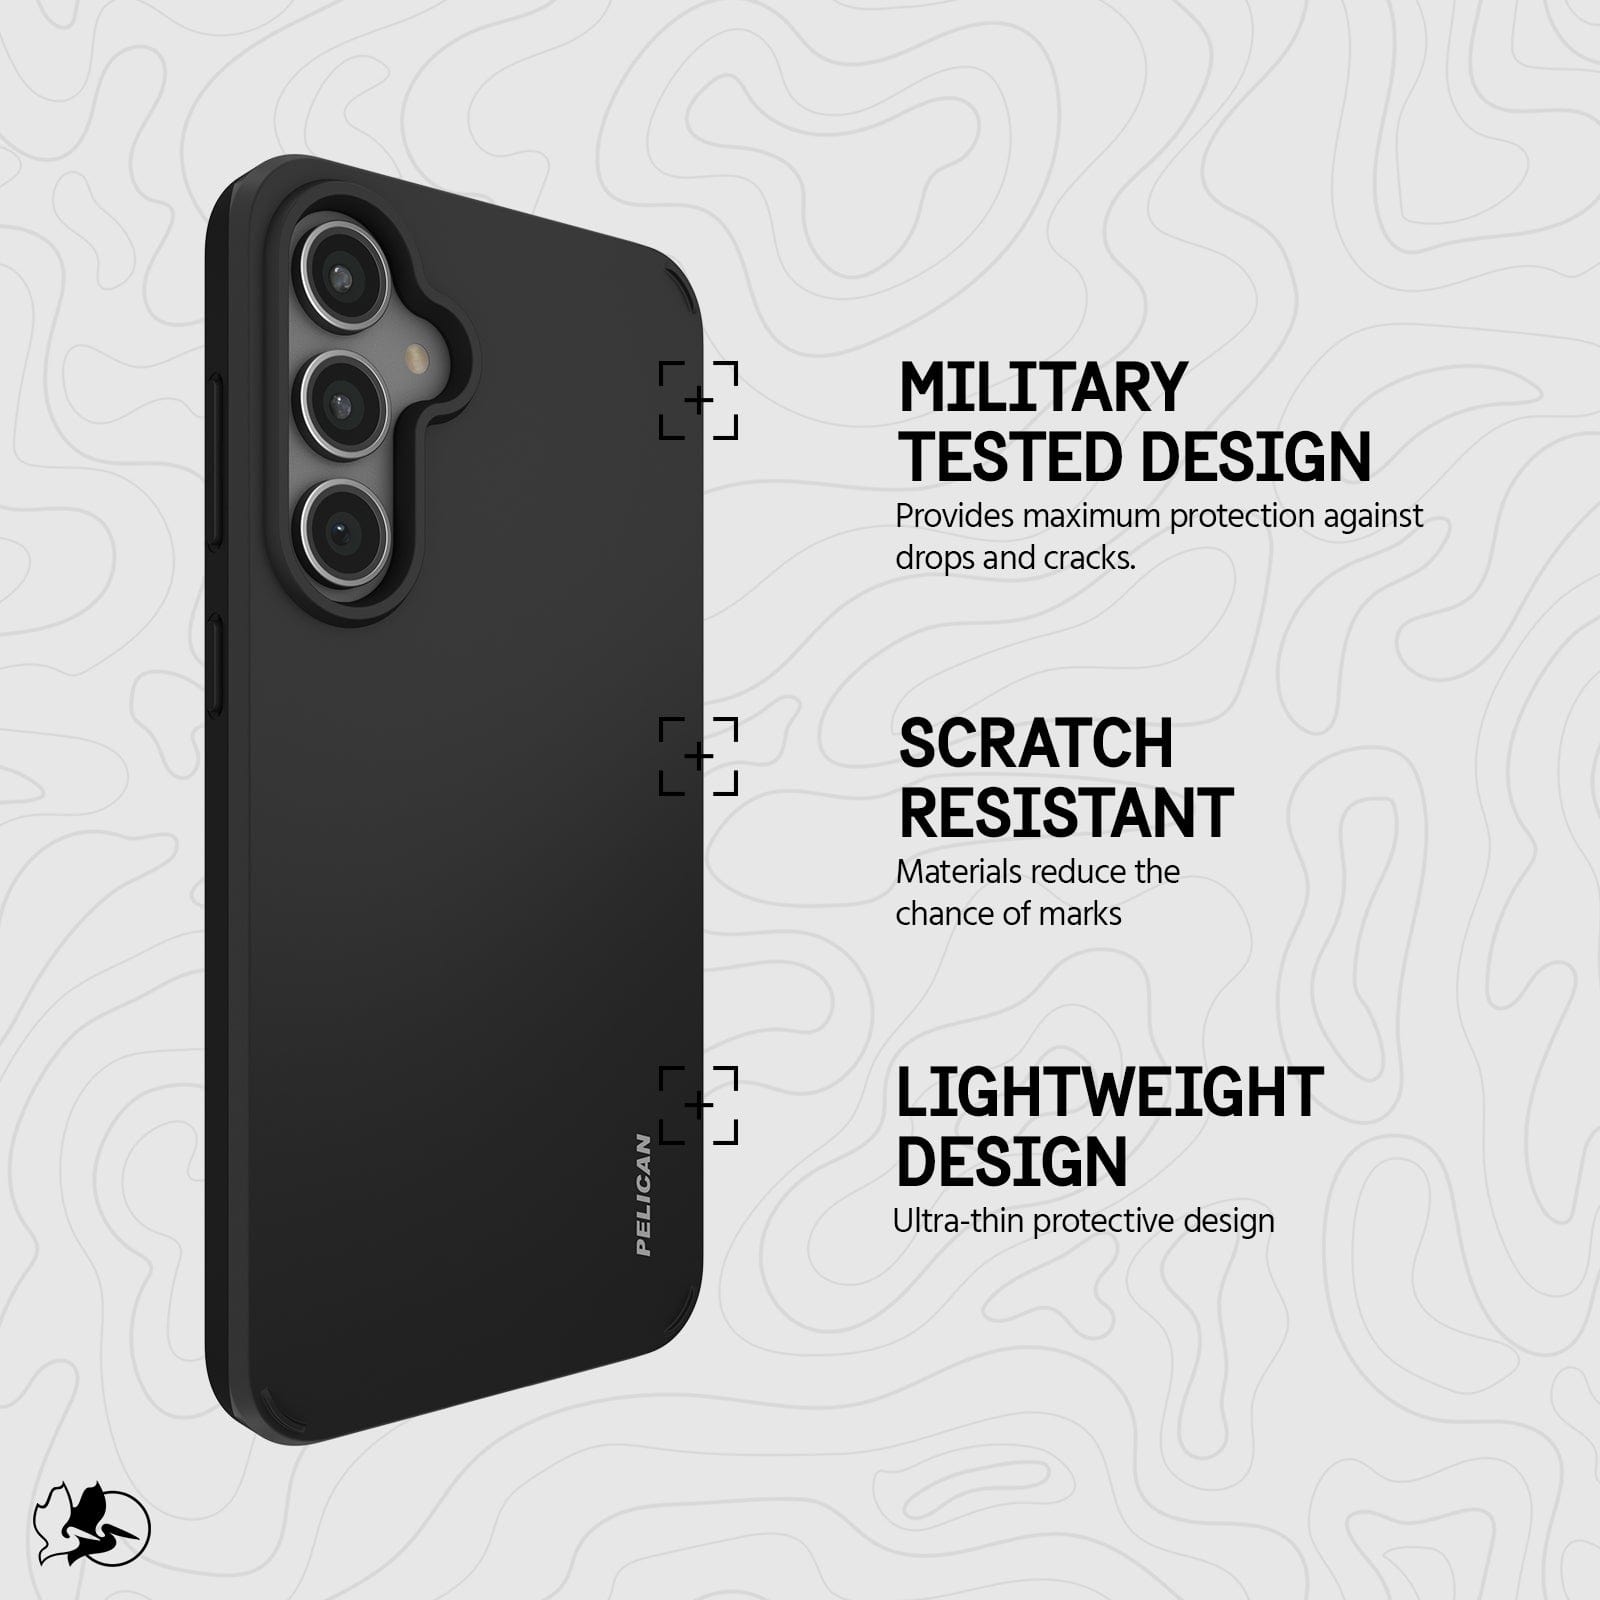 MILITARY TESTED DESIGN. PROVIDES MAXIMUM PROTECTION AGAINST DROPS AND CRACKS. SCRATCH RESISTANT MATERIALS REDUCE THE CHANCE OF MARKS. LIGHTWEIGHT DESGN. ULTRA-THIN PROTECTIVE DESIGN